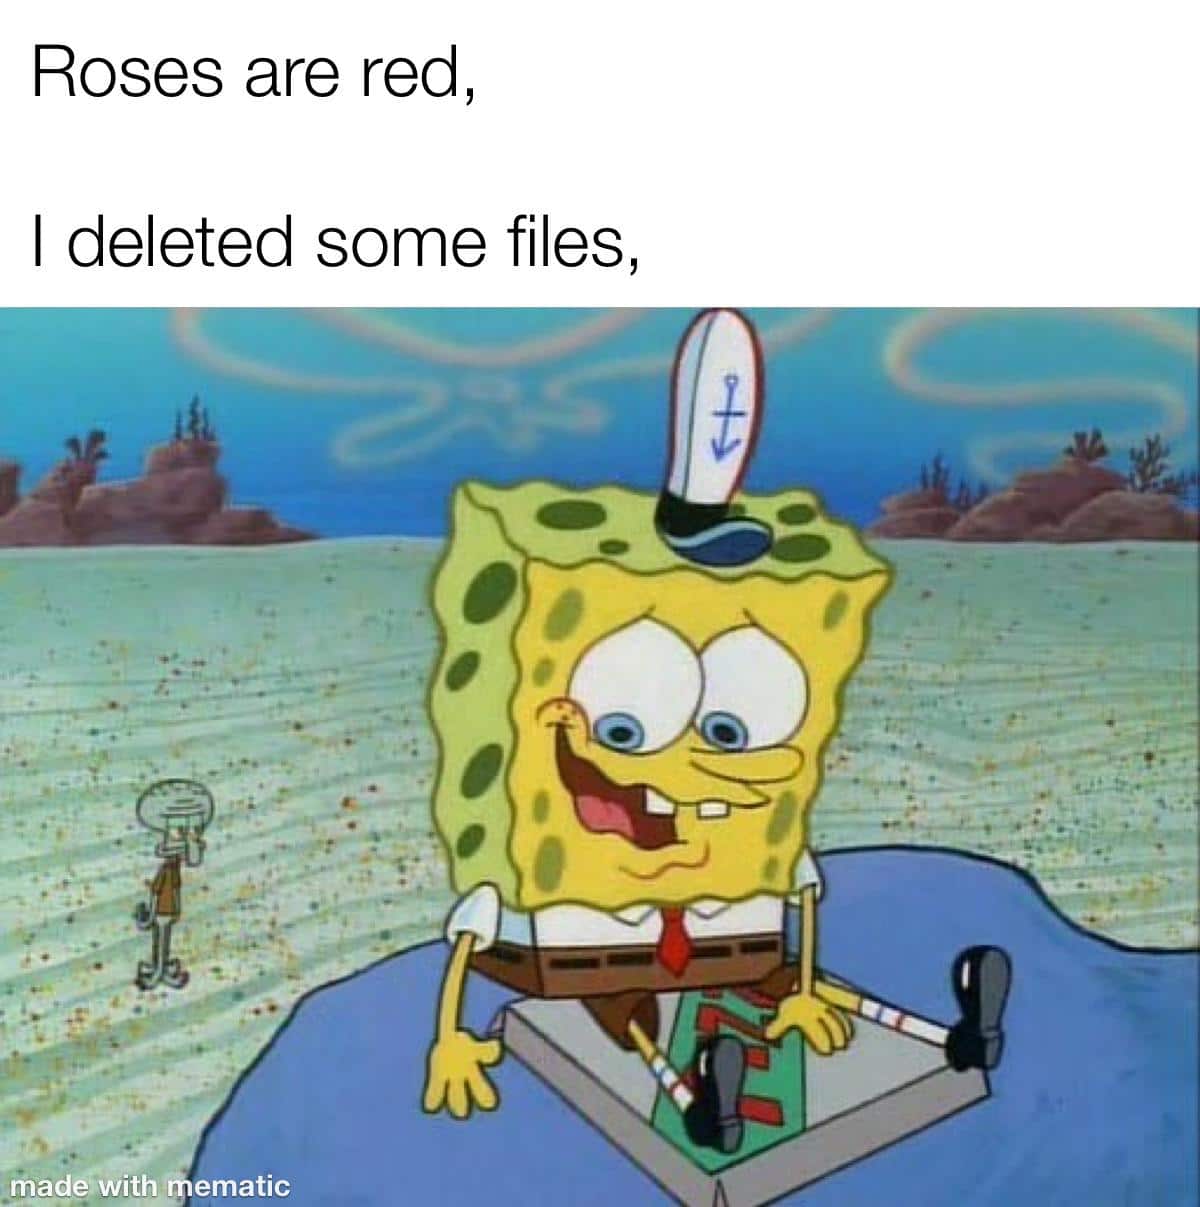 Spongebob, True Spongebob Memes Spongebob, True text: Roses are red, I deleted some files, nadewith ematic 